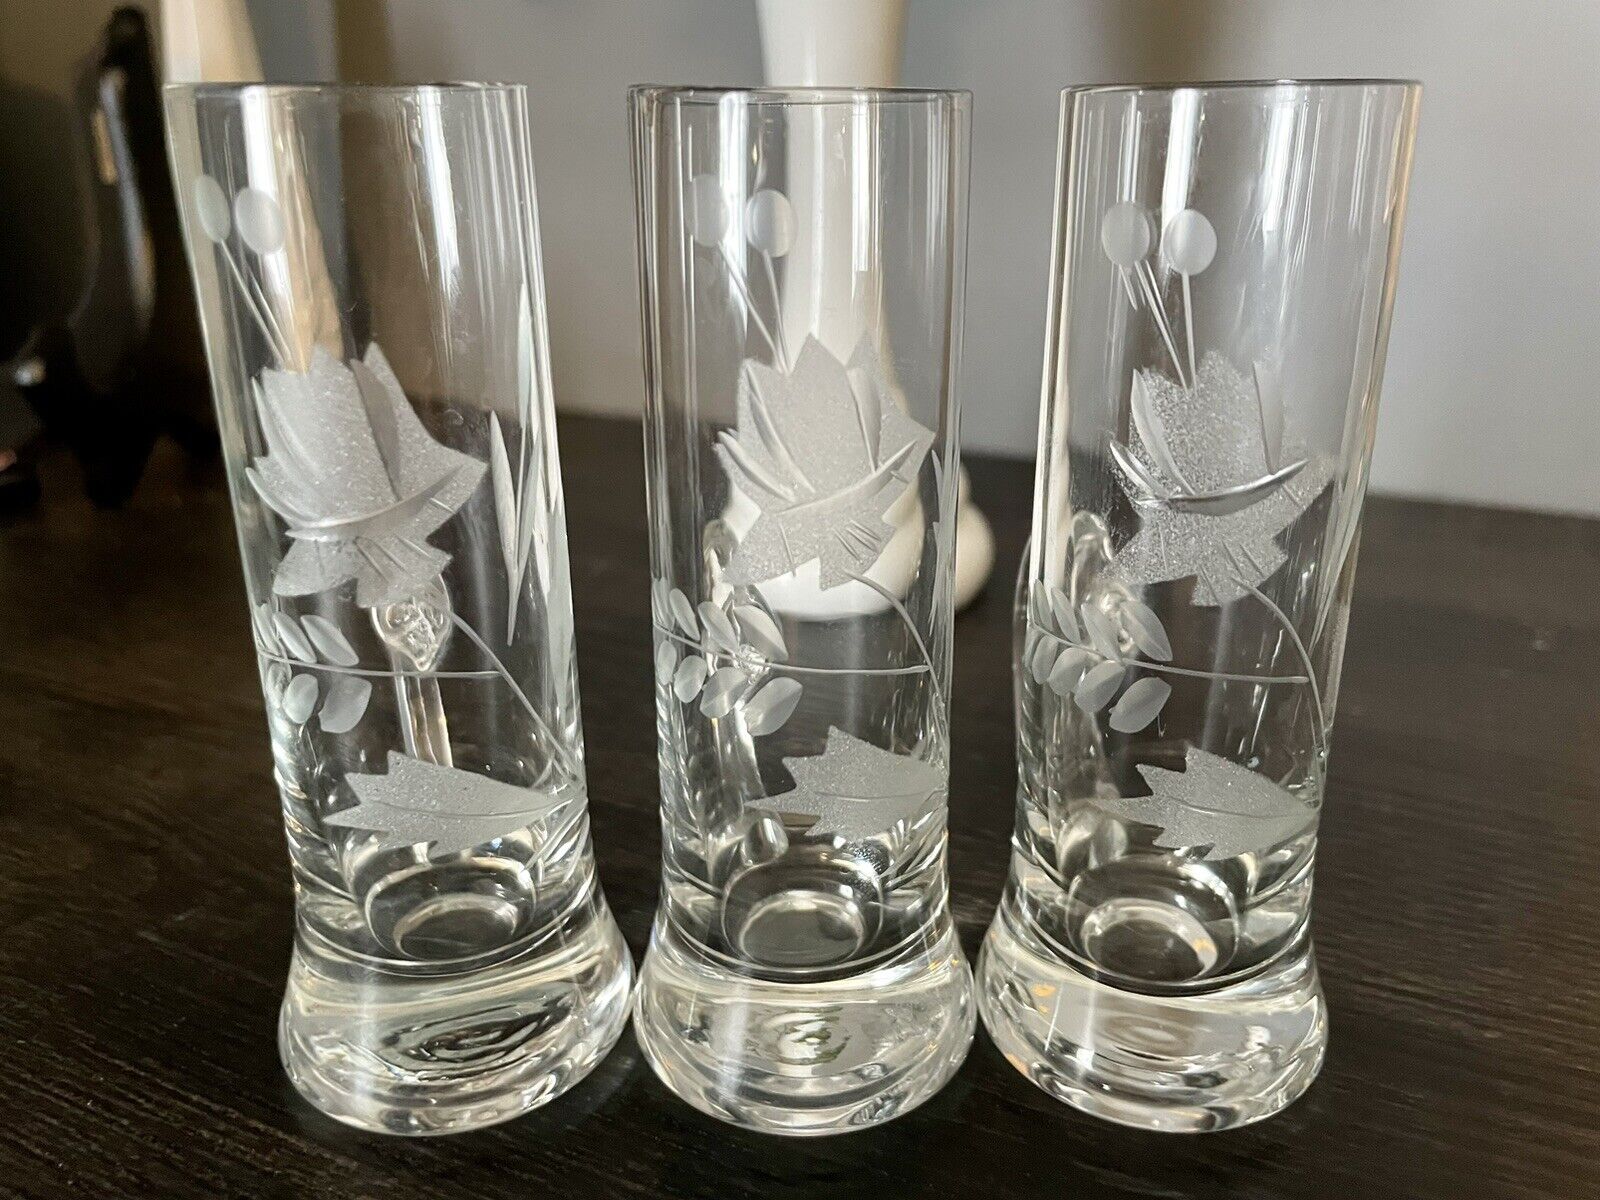 3 VINTAGE BOHEMIAN ETCHED CRYSTAL WATER LILLY SHOT GLASSES WITH HANDLES, SO CUTE